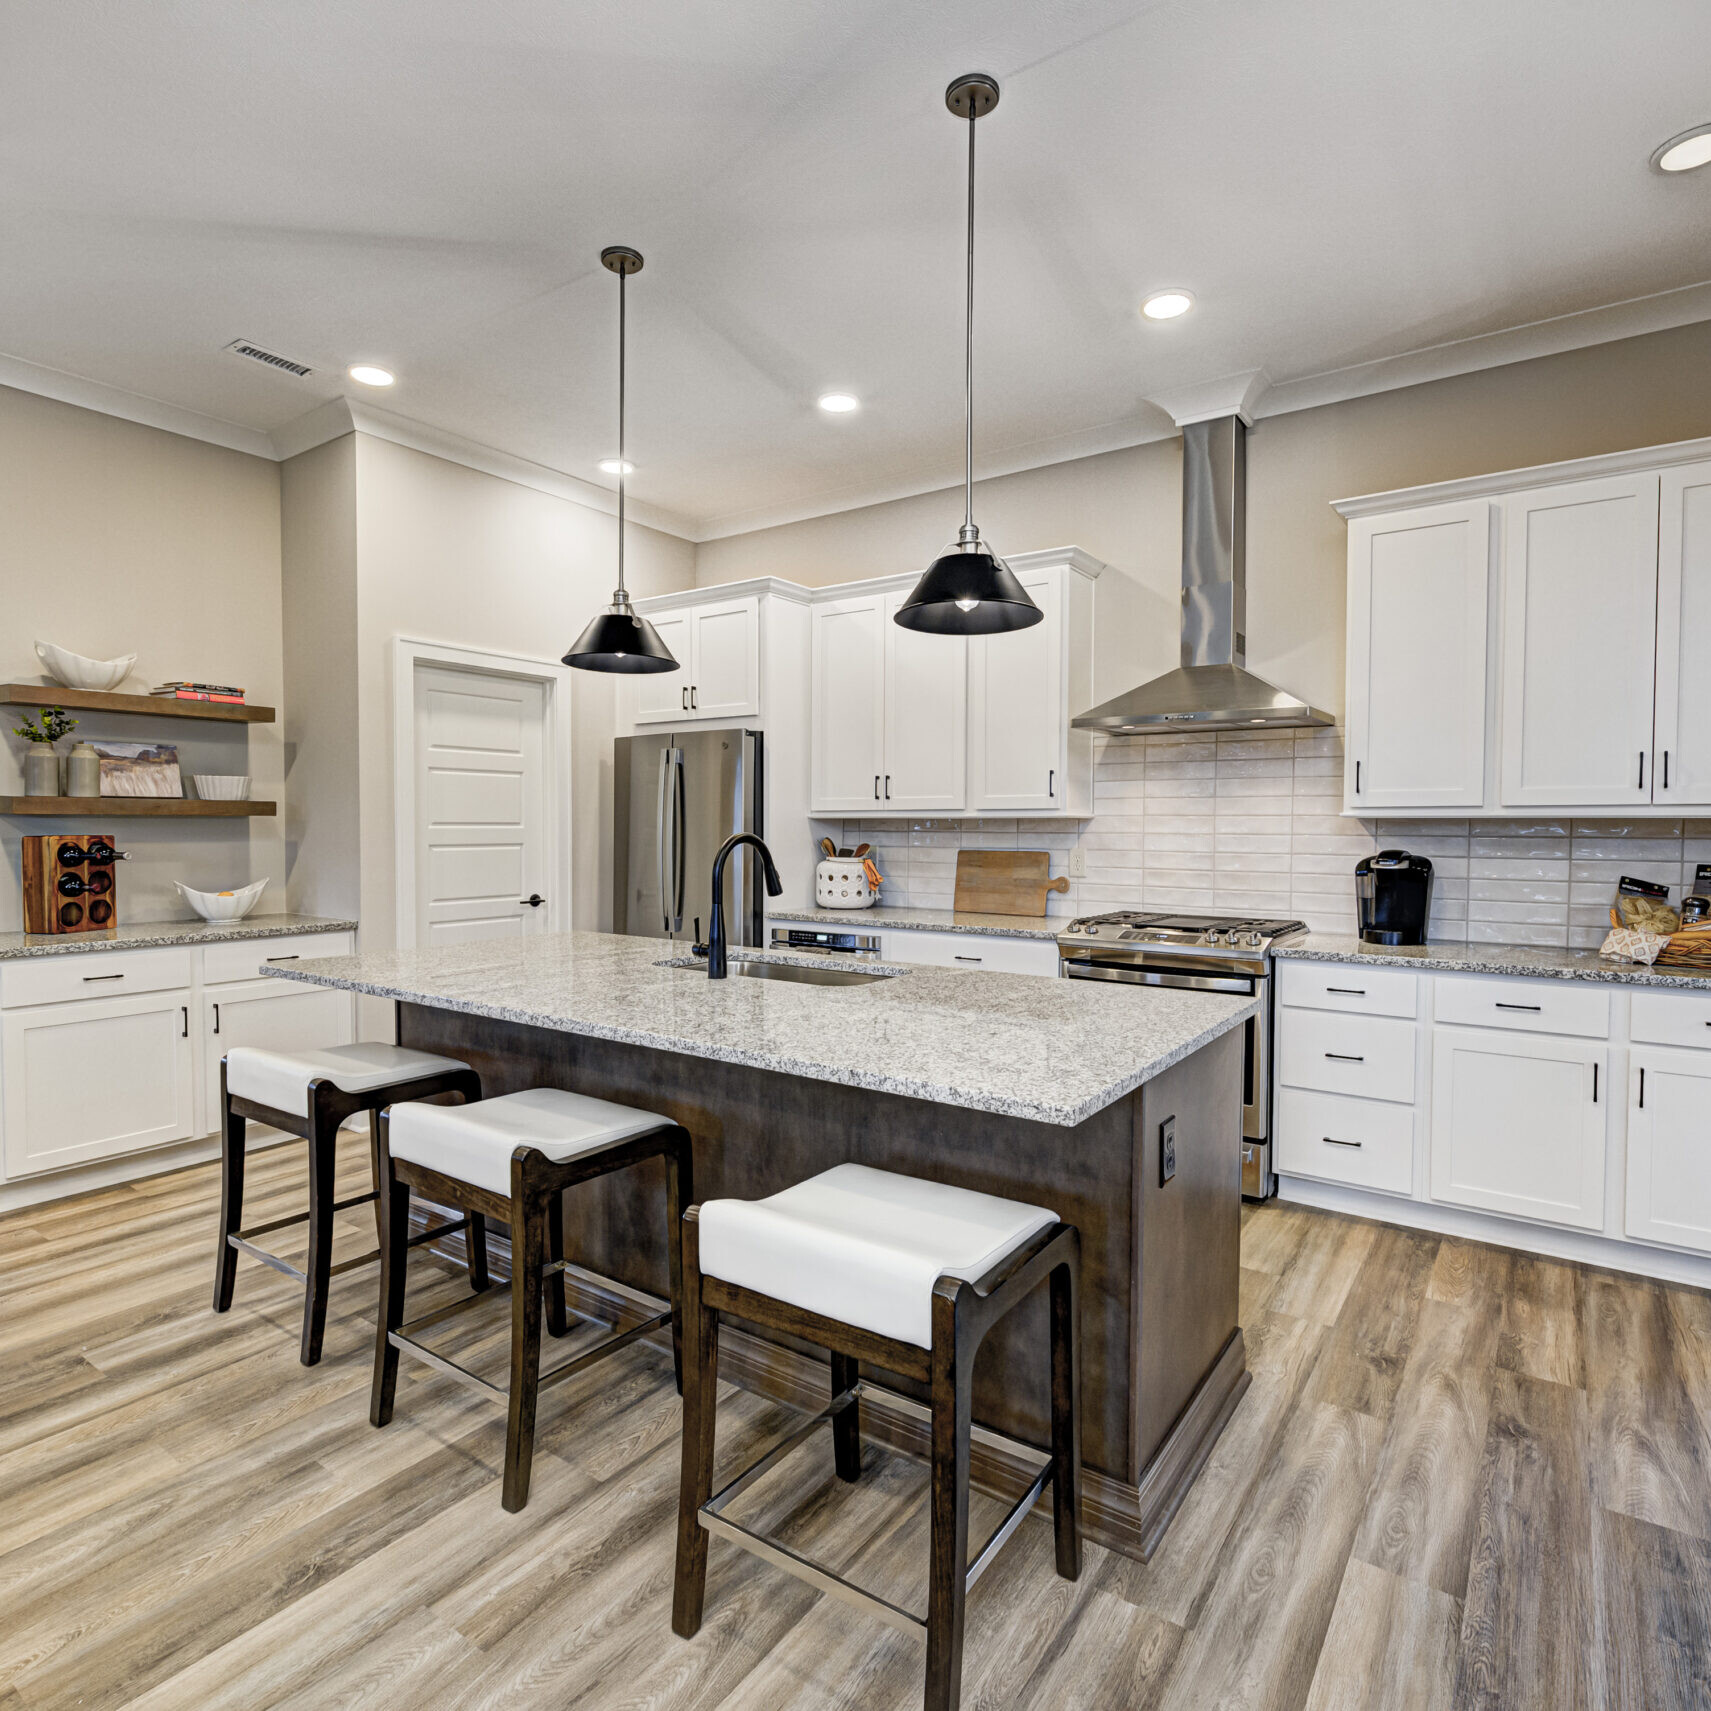 A white kitchen with wood floors and a center island in a custom home.